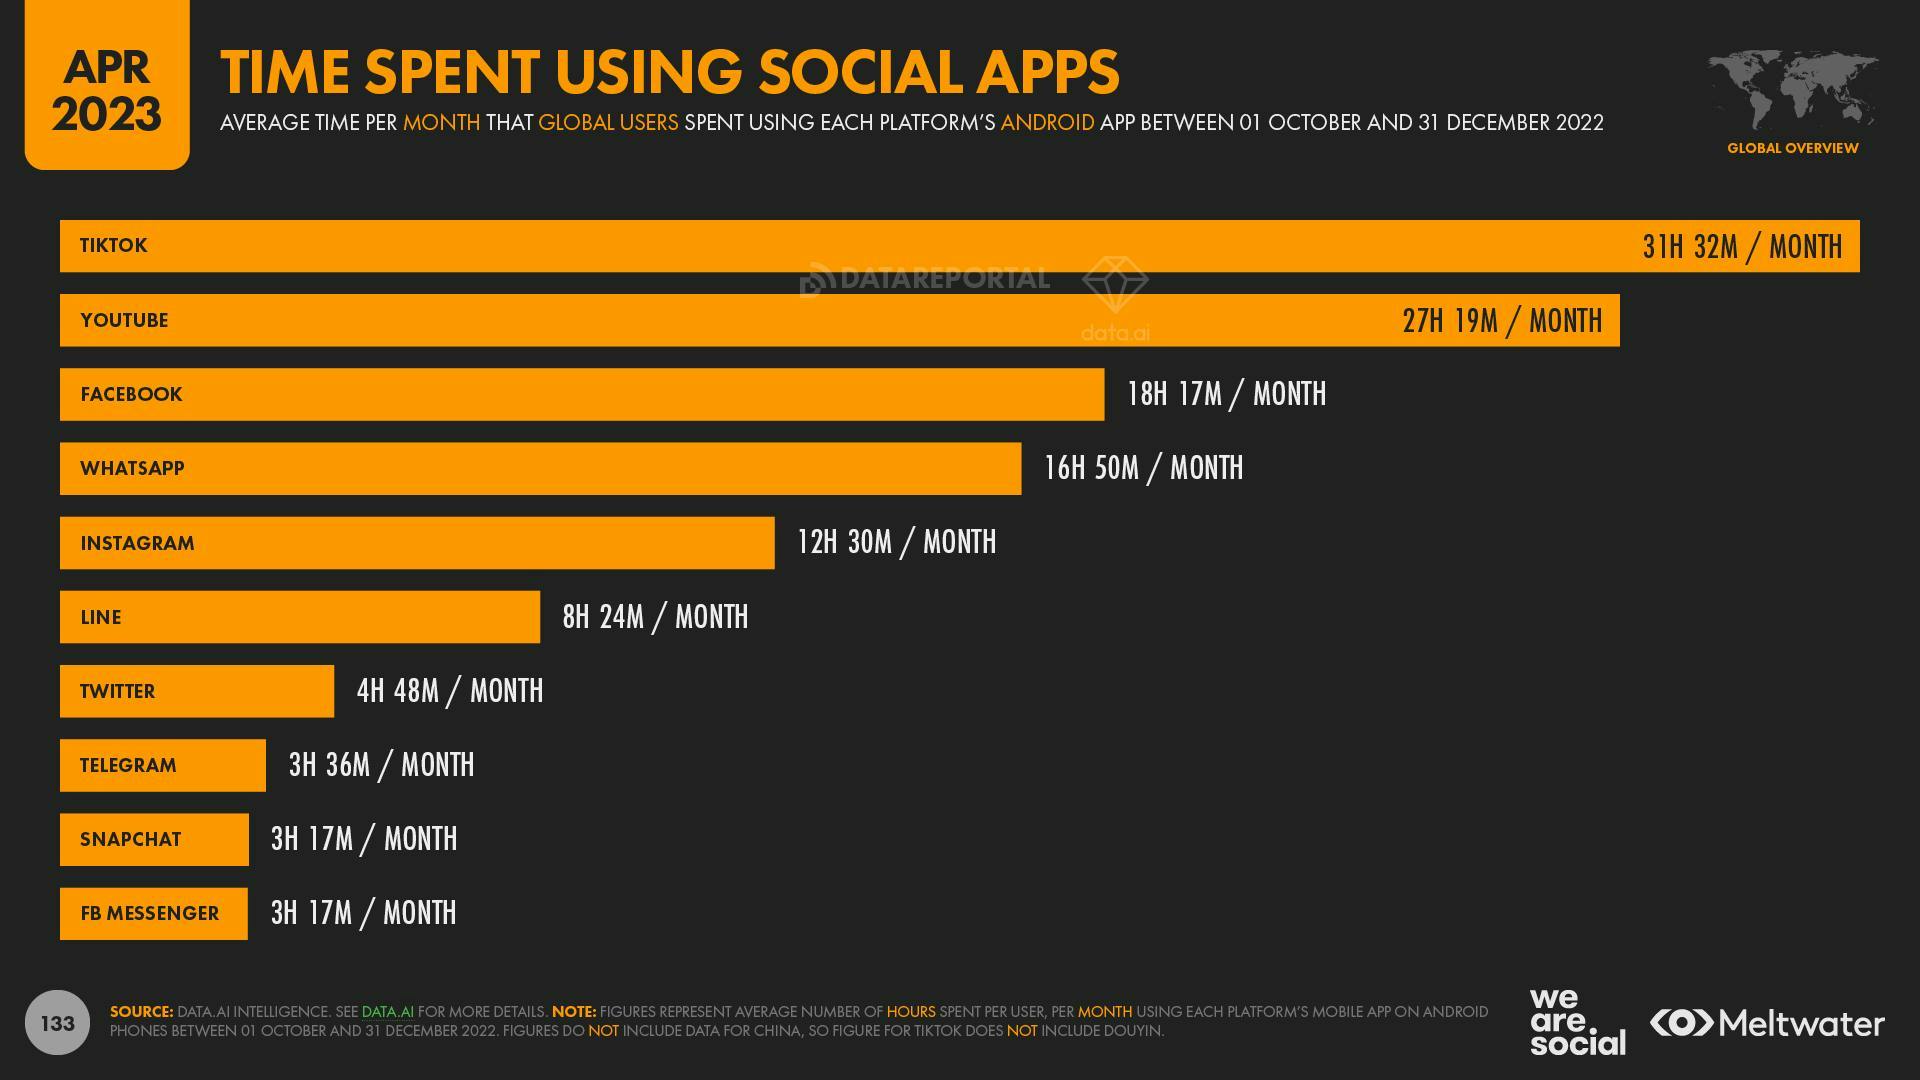 April 2023 Global State of Digital Report: Time Spent Using Social Apps